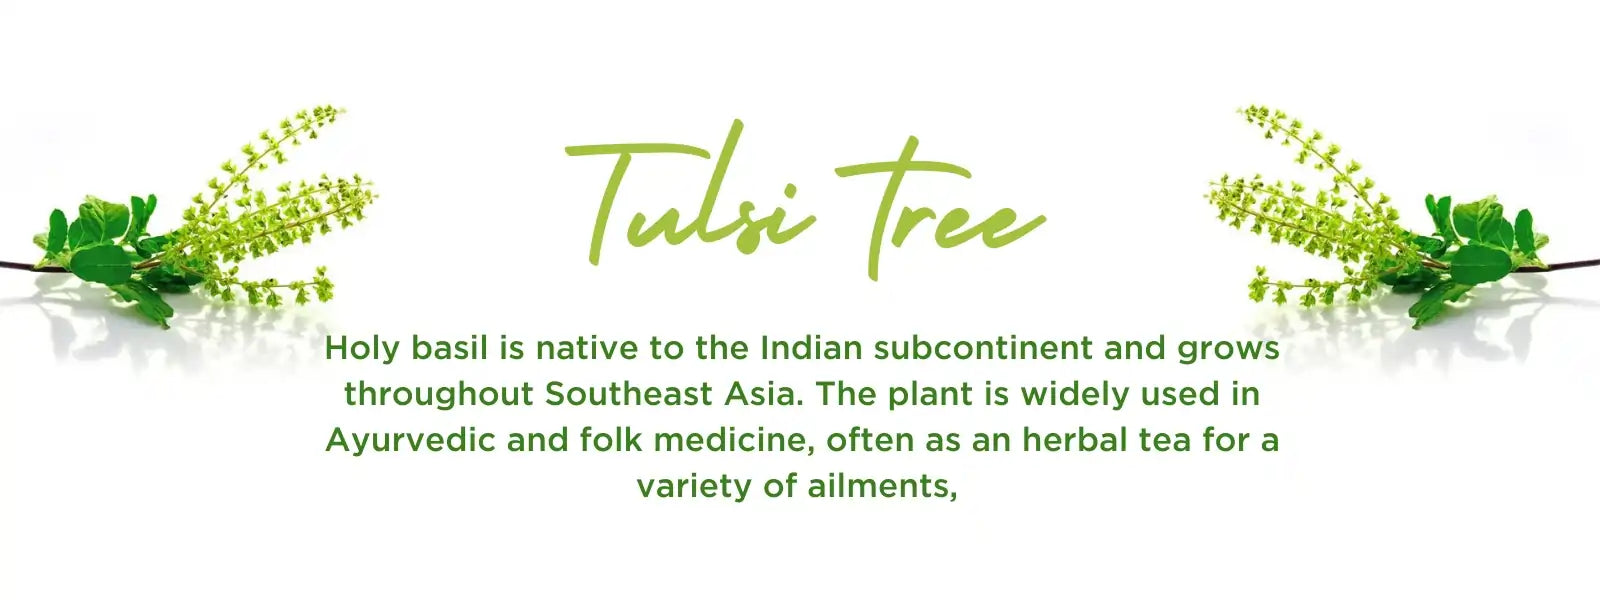 Tulsi tree - Health Benefits, Uses and Important Facts